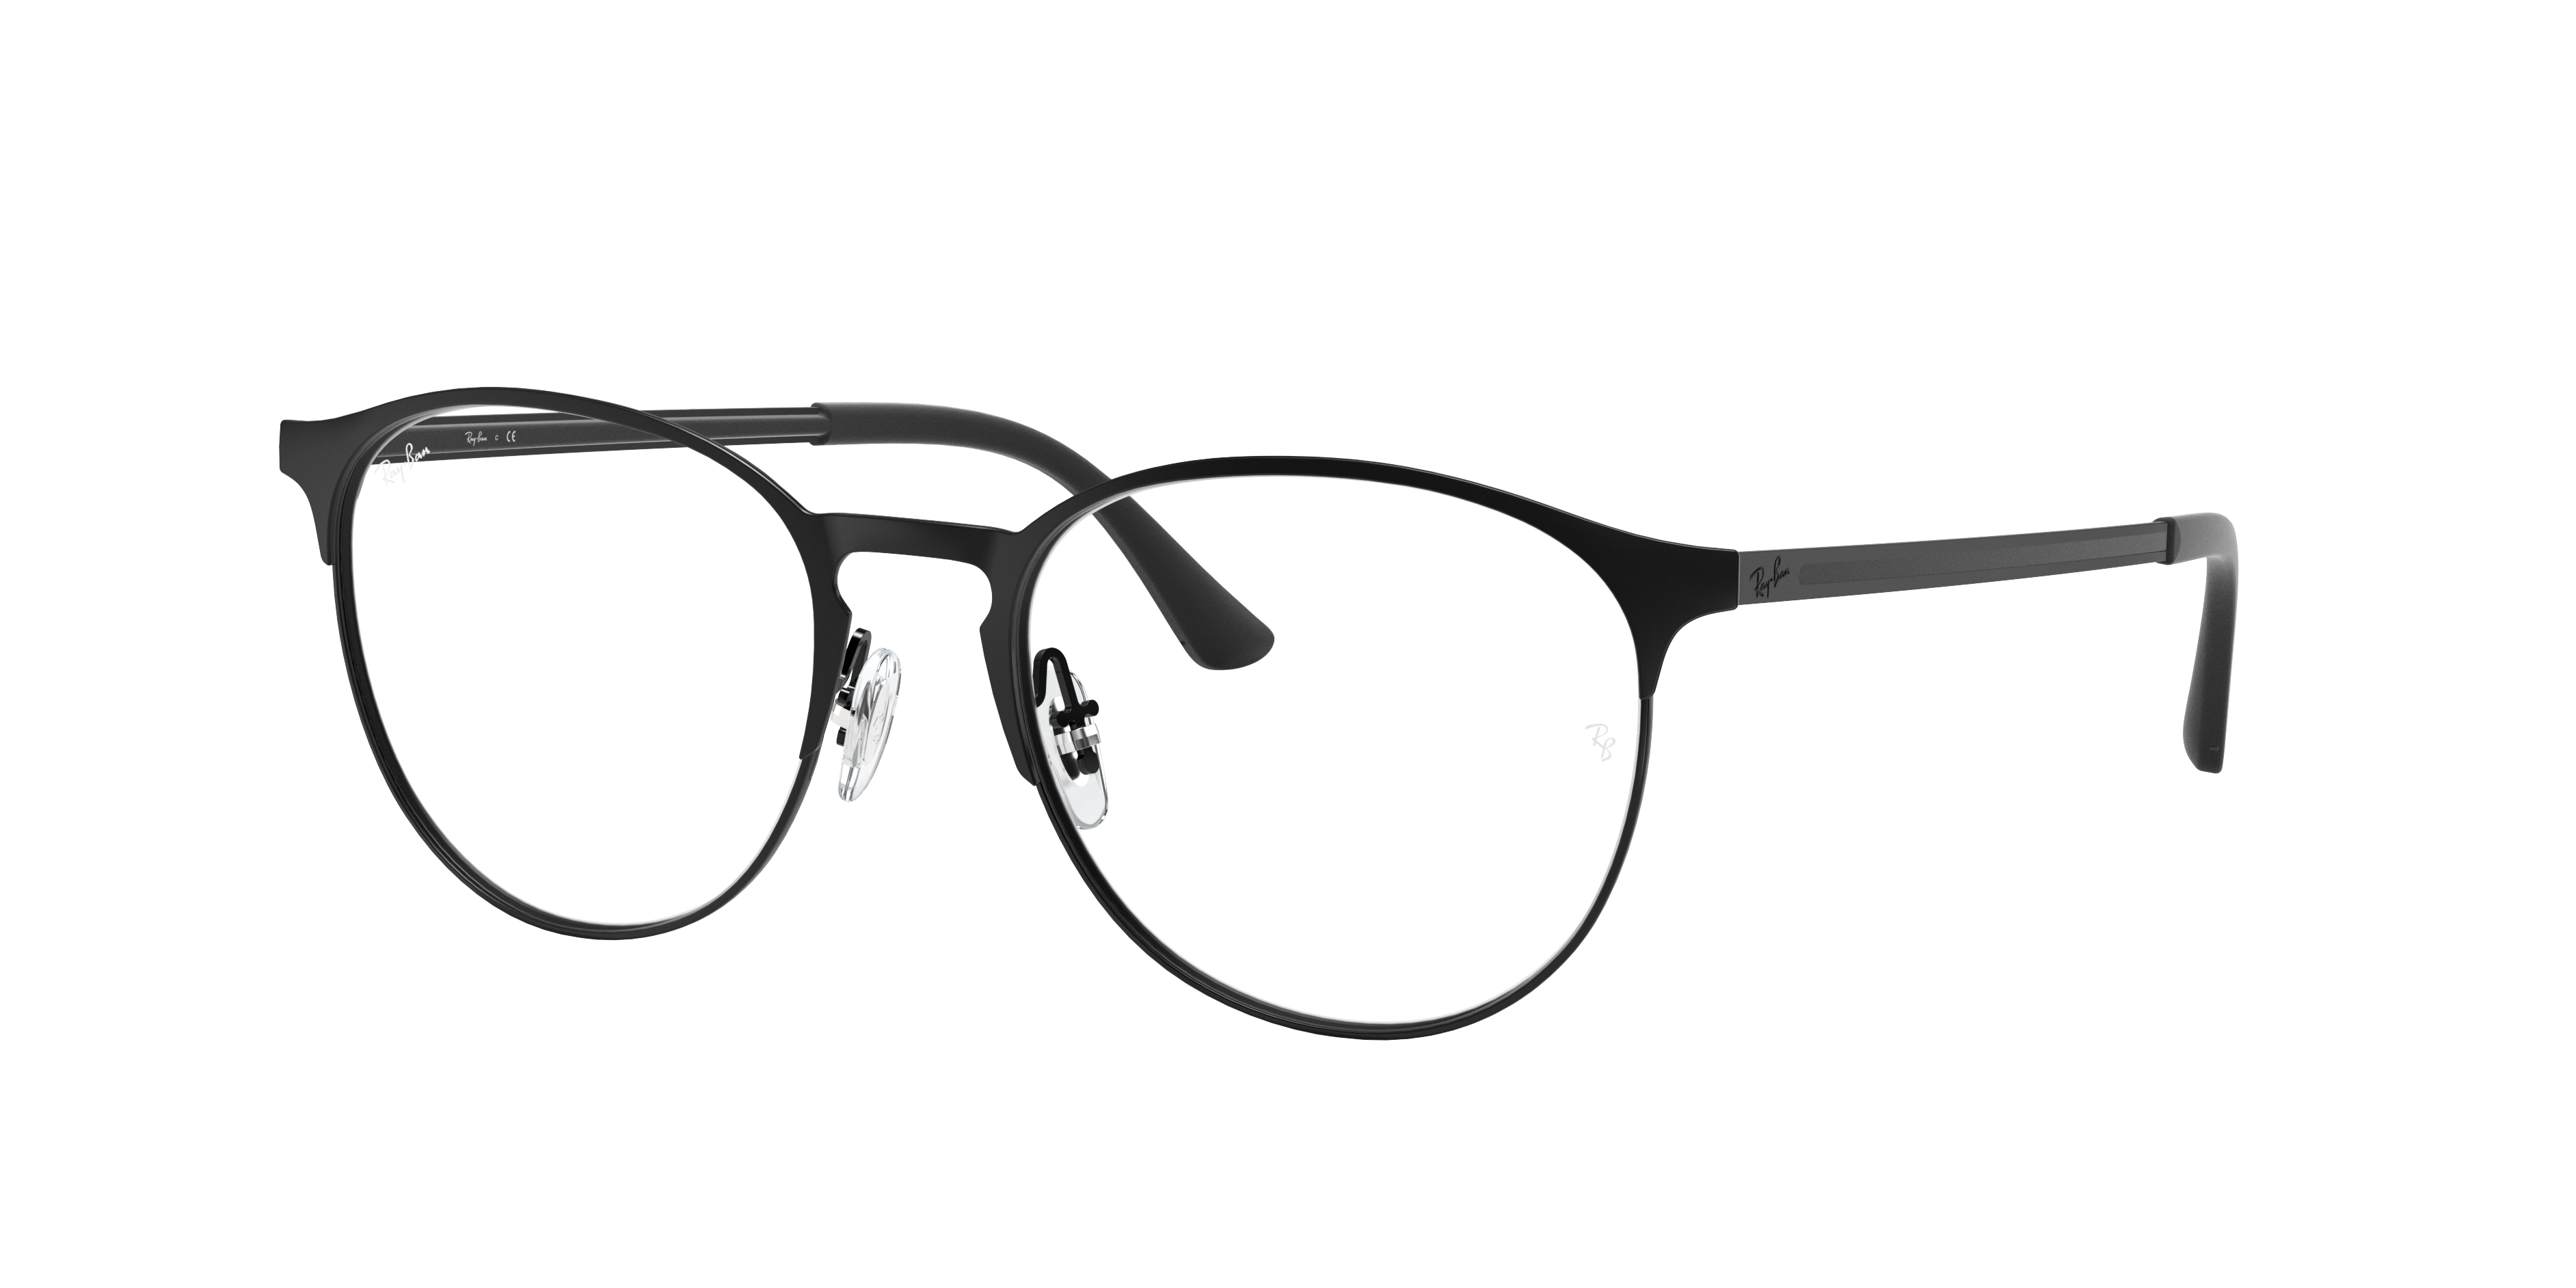 Ray-Ban 0RX6375 in Black Glasses | OPSM